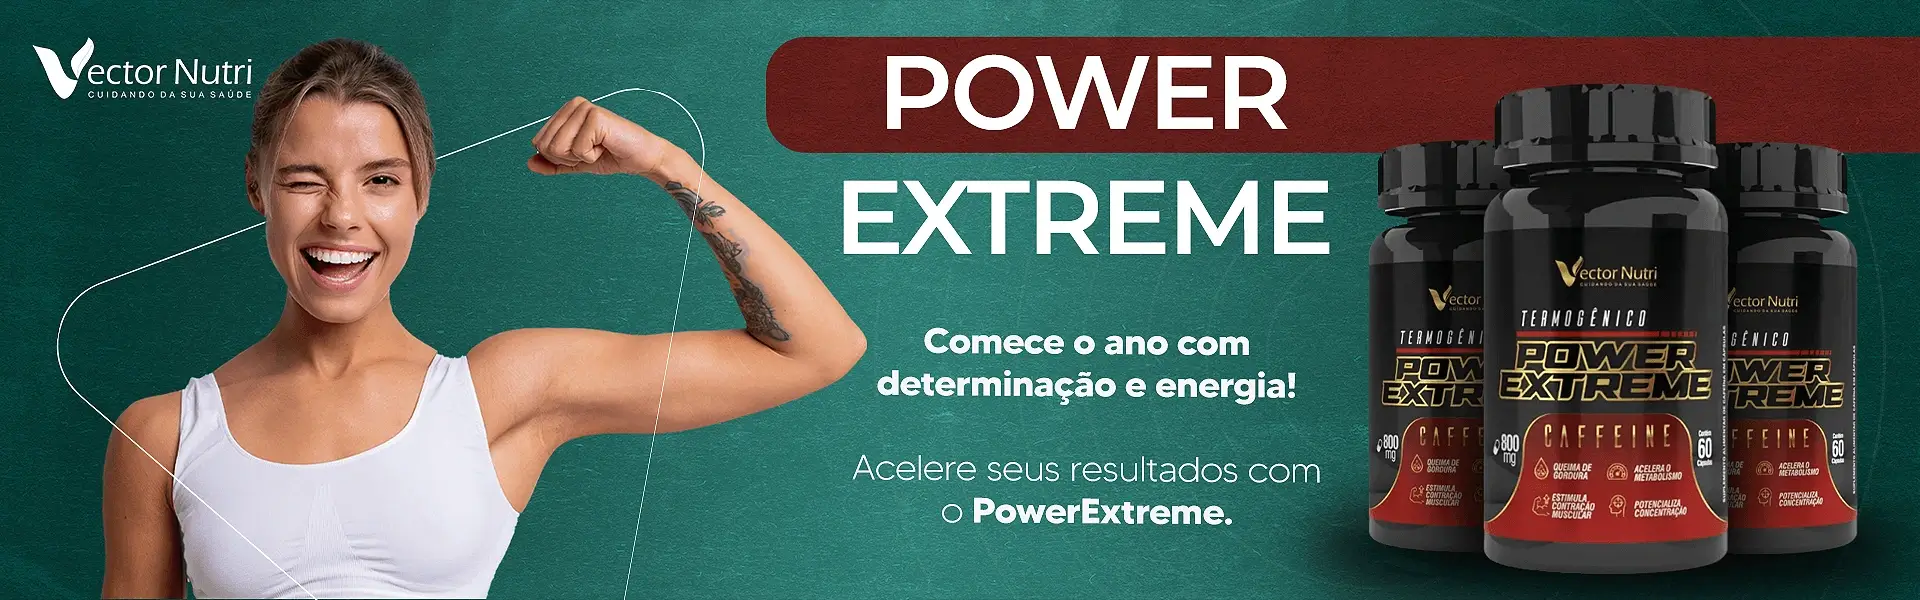 BANNER-power-extreme